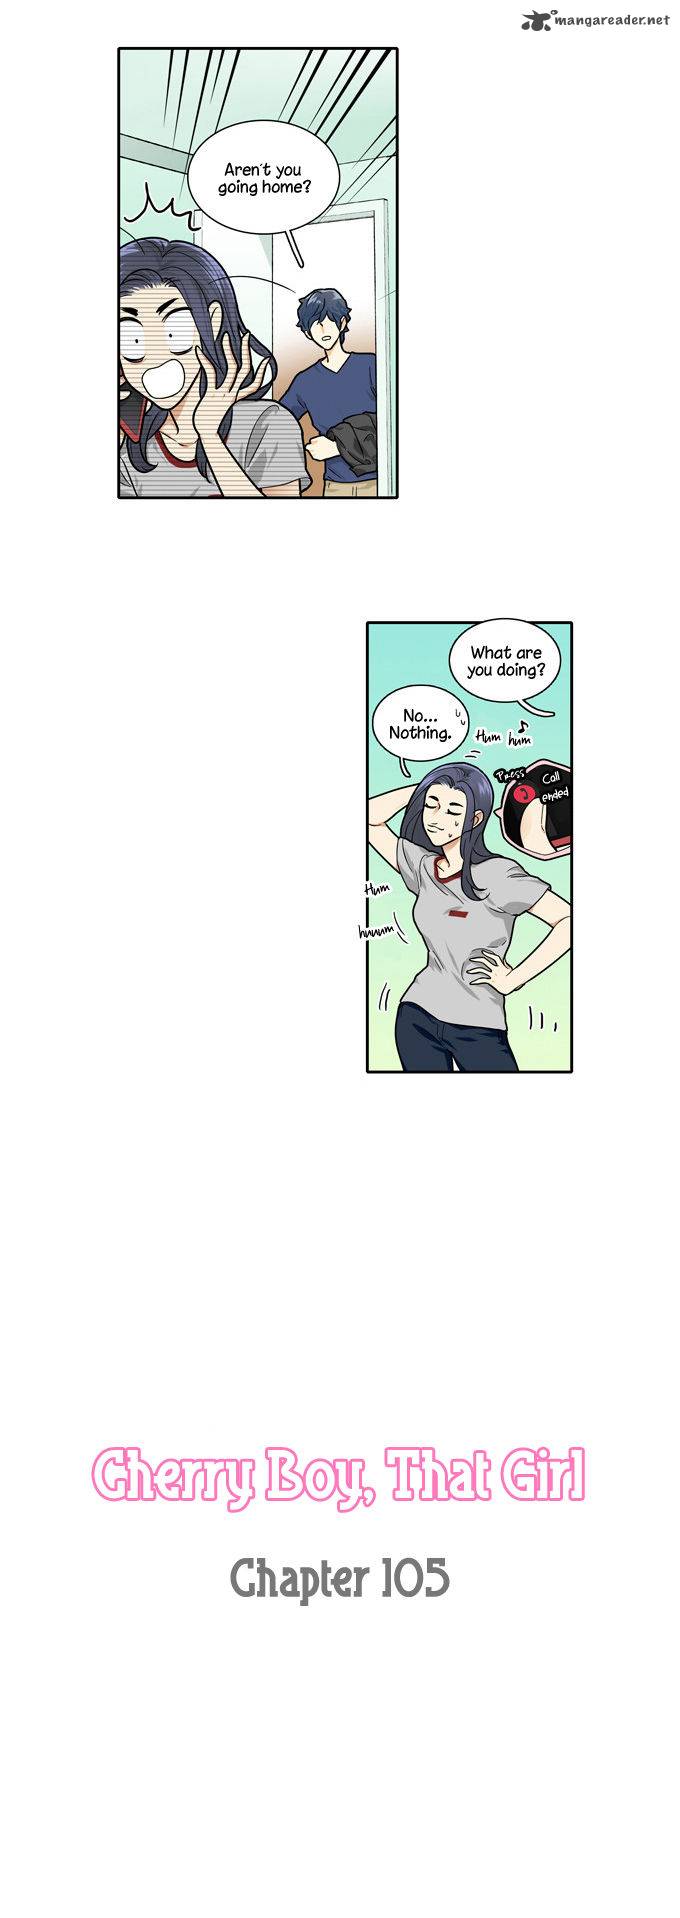 Cherry Boy That Girl Chapter 105 Page 3